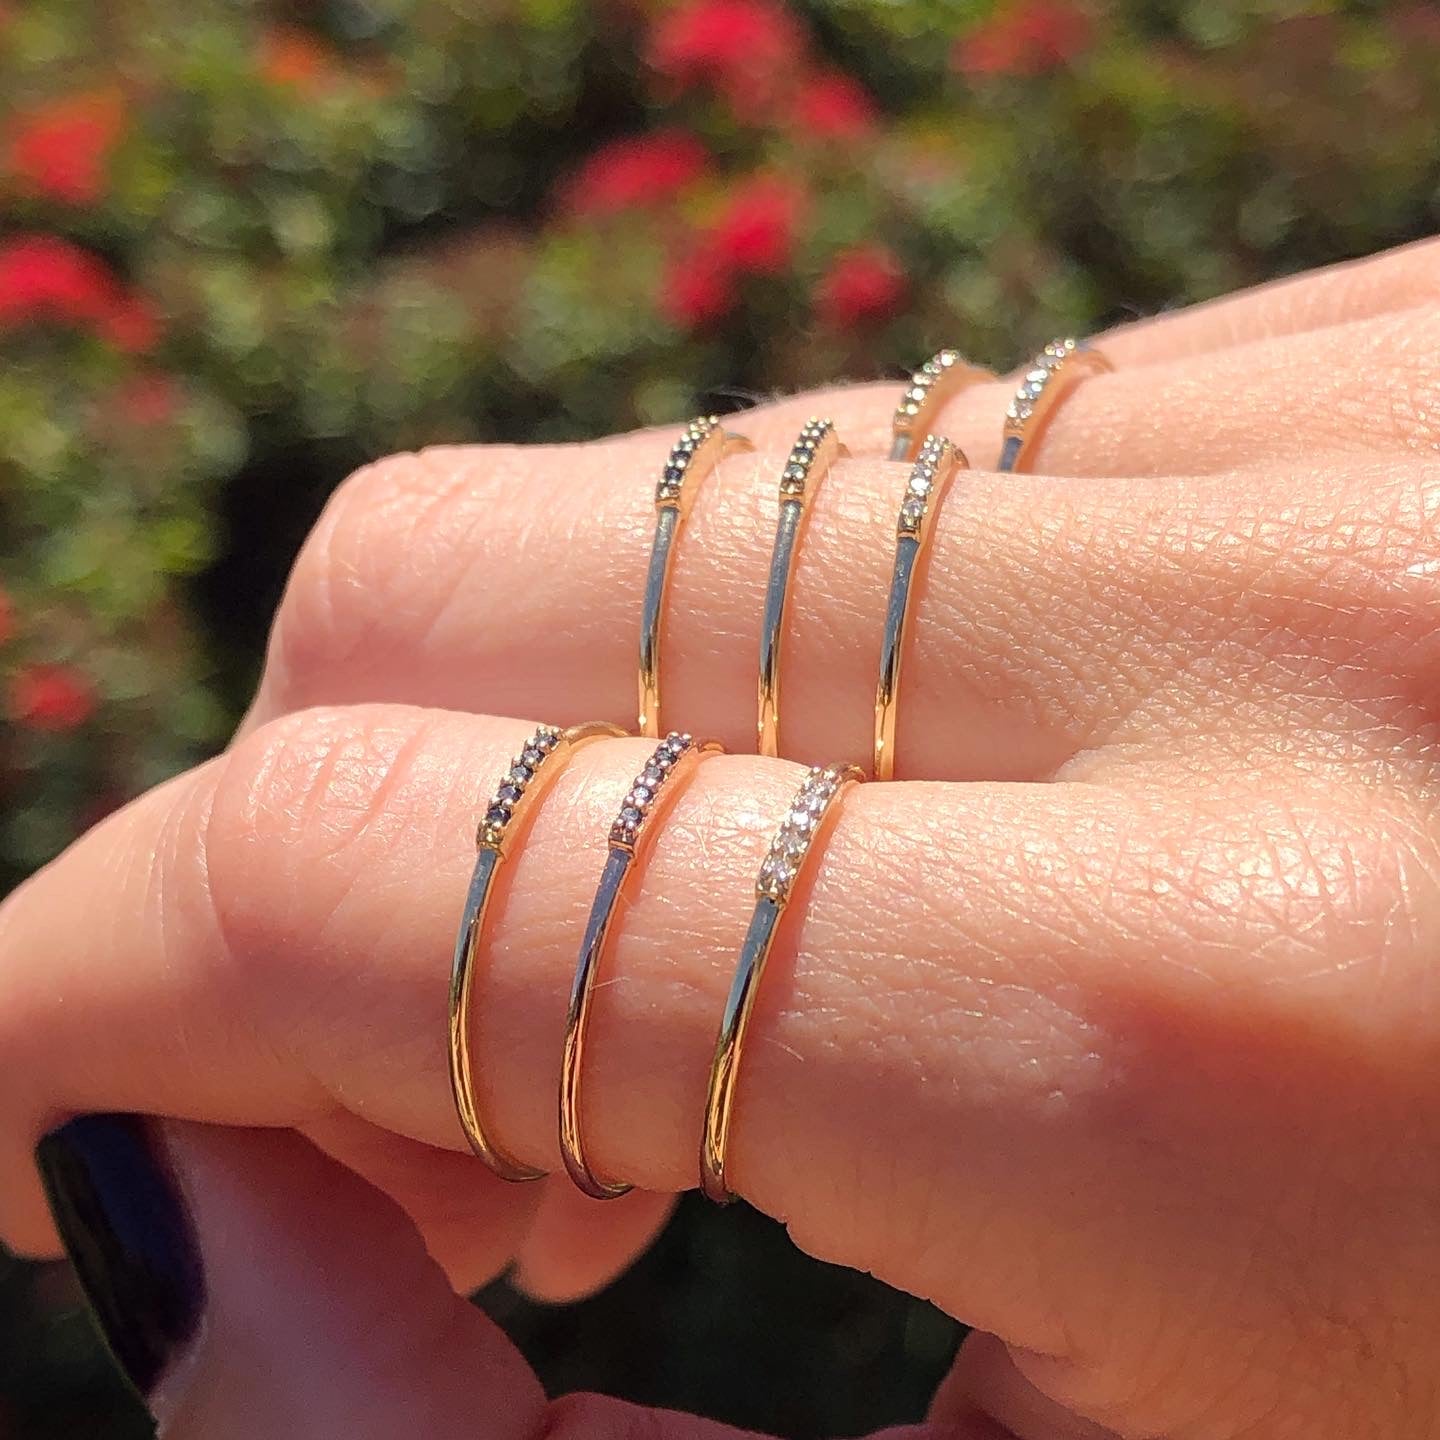 Gold and diamond stacking rings on human hand